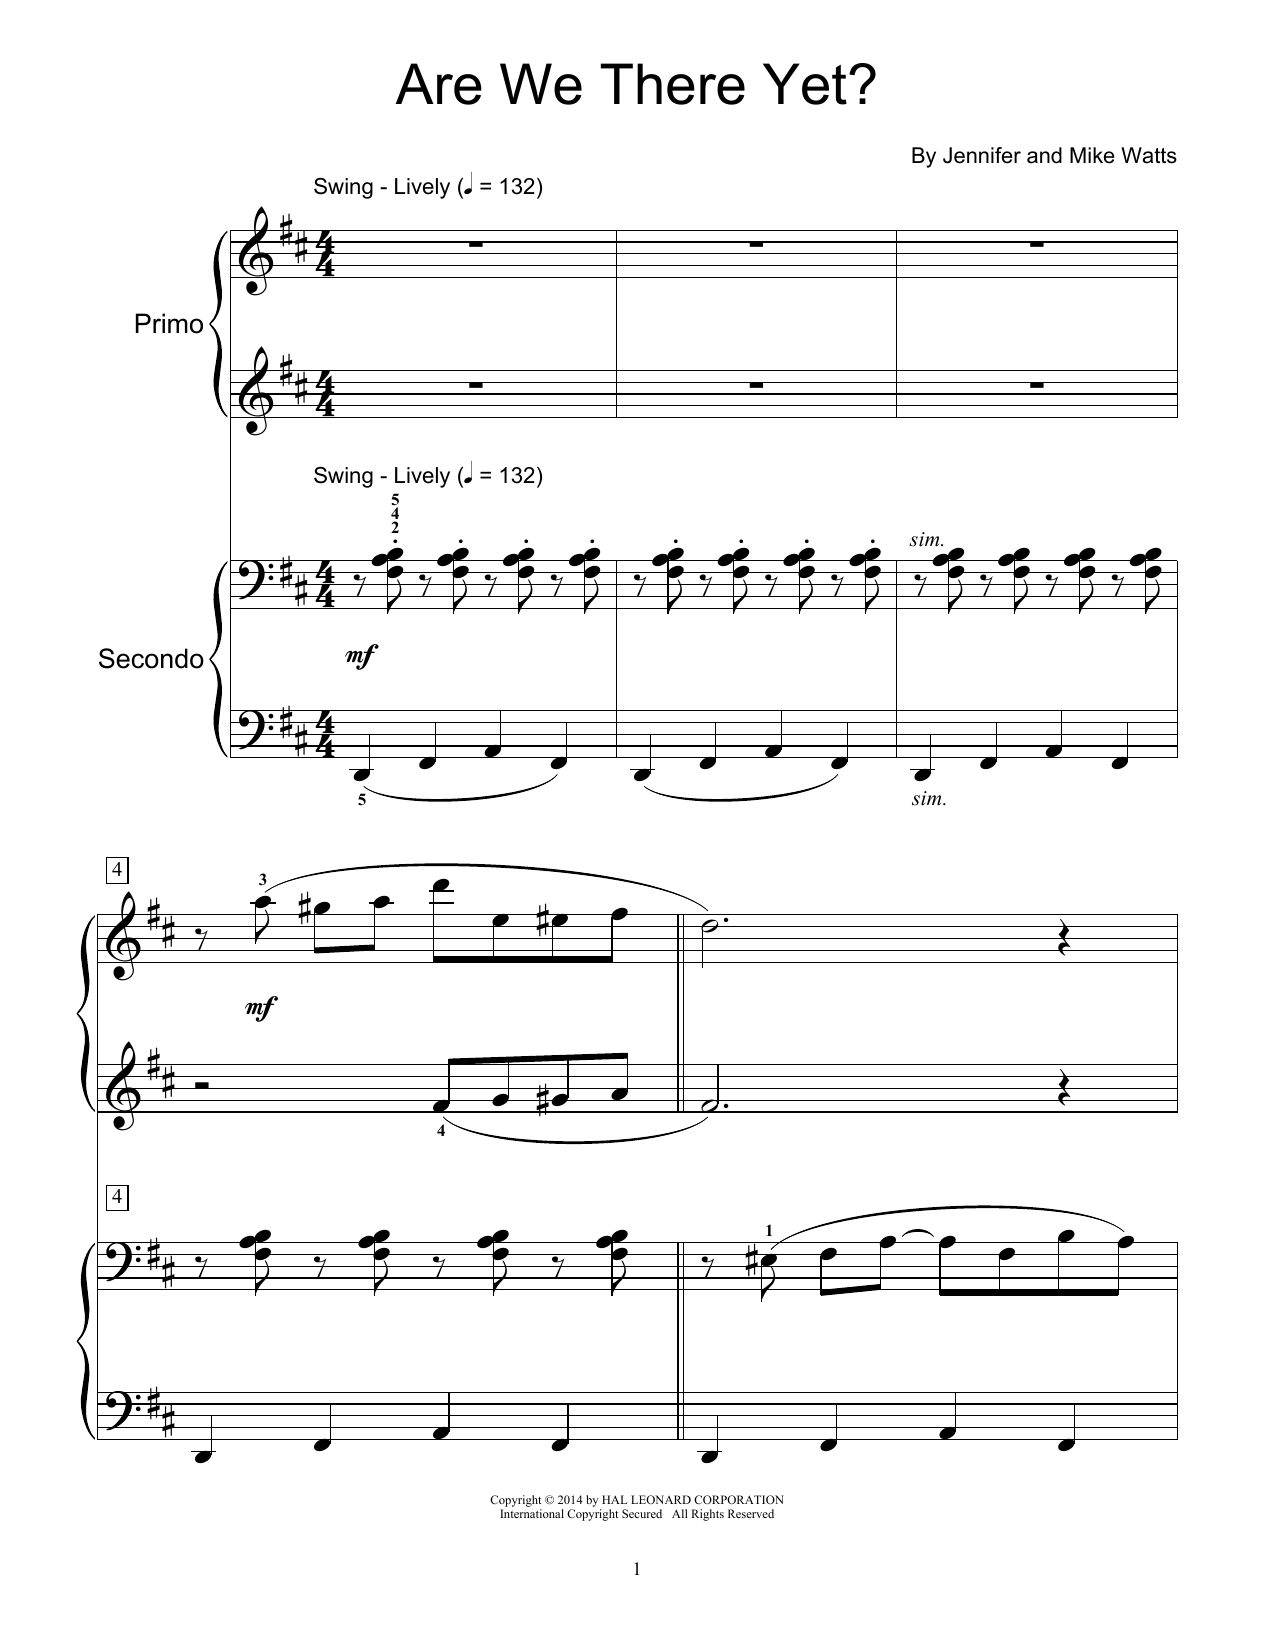 Download Jennifer Watts Are We There Yet? Sheet Music